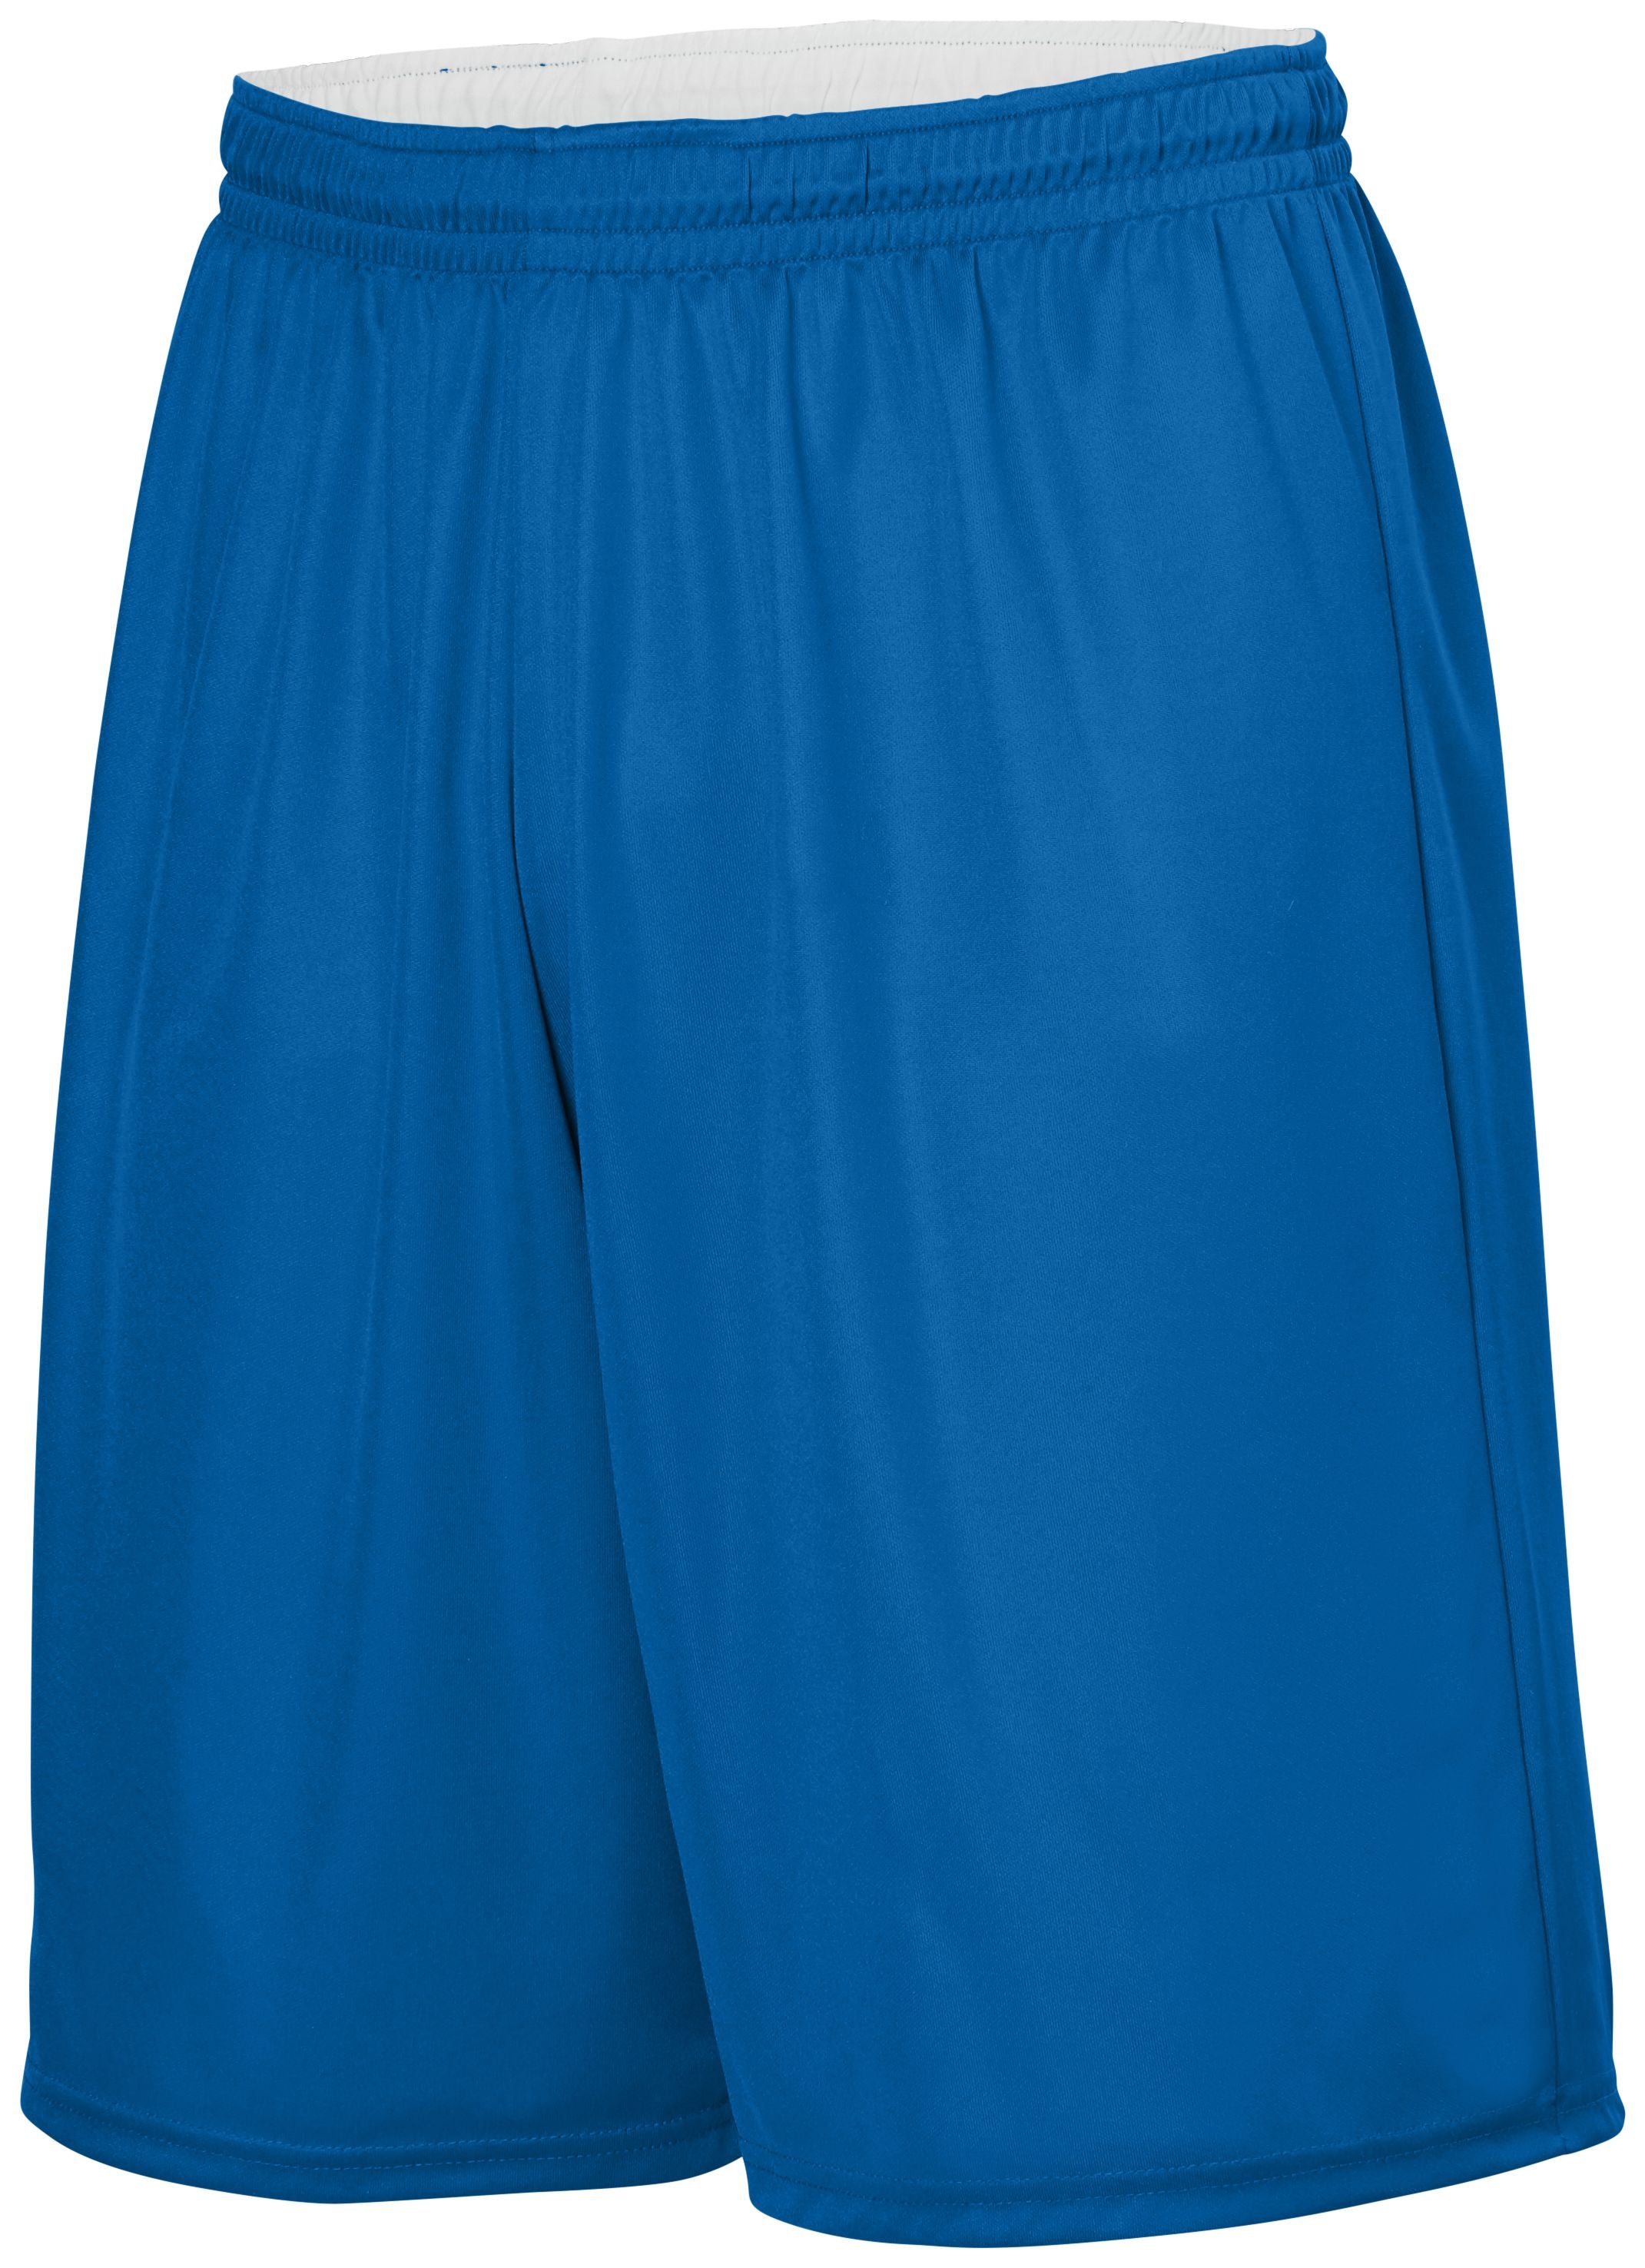 Augusta Sportswear Youth Reversible Wicking Shorts in Royal/White  -Part of the Youth, Youth-Shorts, Augusta-Products, Basketball, All-Sports, All-Sports-1 product lines at KanaleyCreations.com